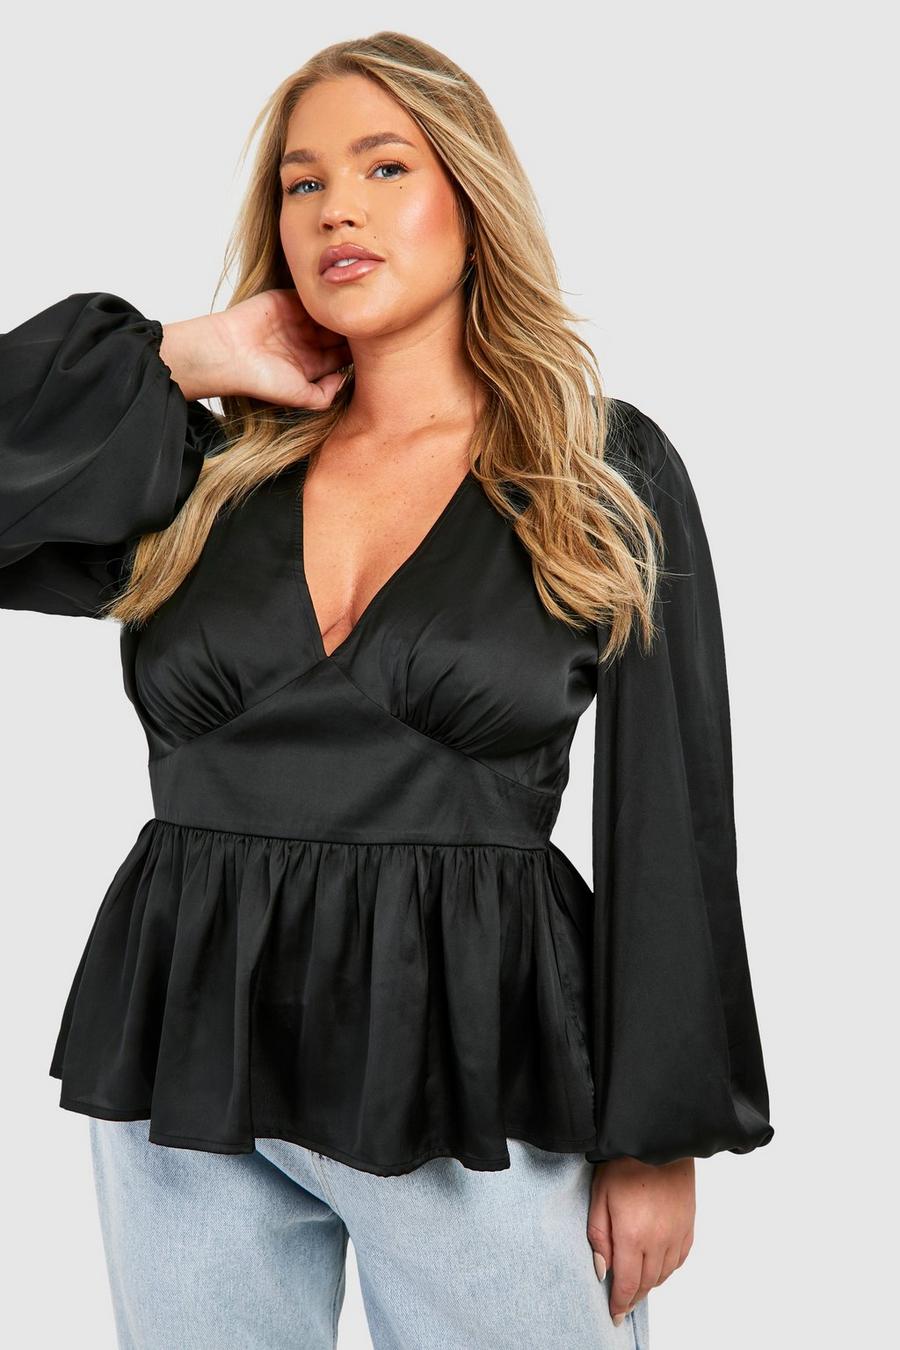 Plus Size Going Out Tops, Plus Size Party Tops